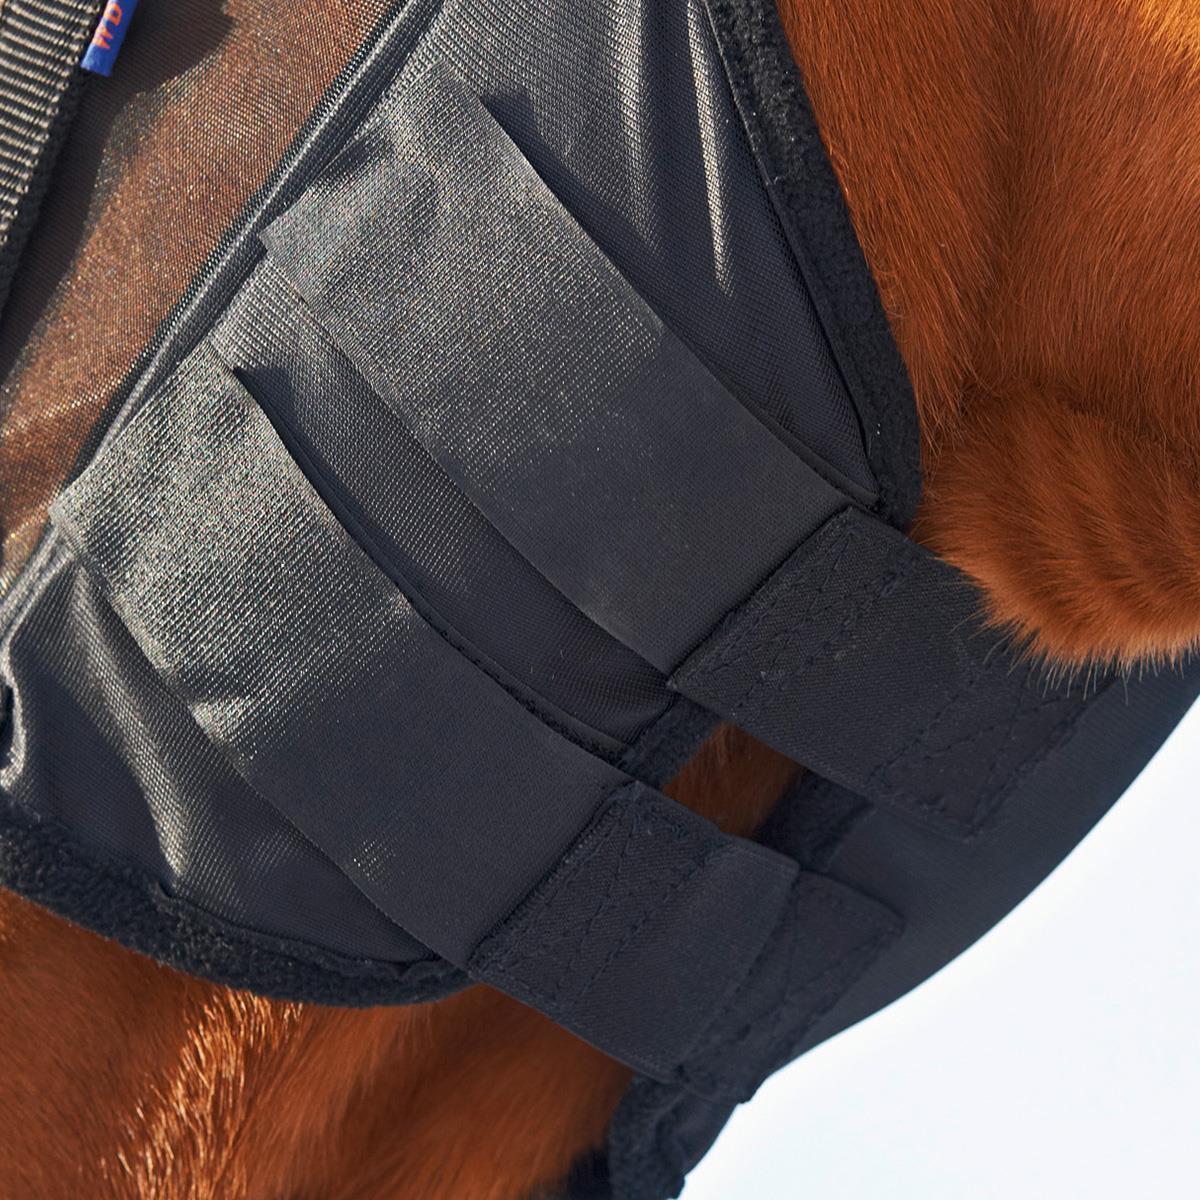 BUSSE Fly Mask FLY PROTECTOR X-FULL